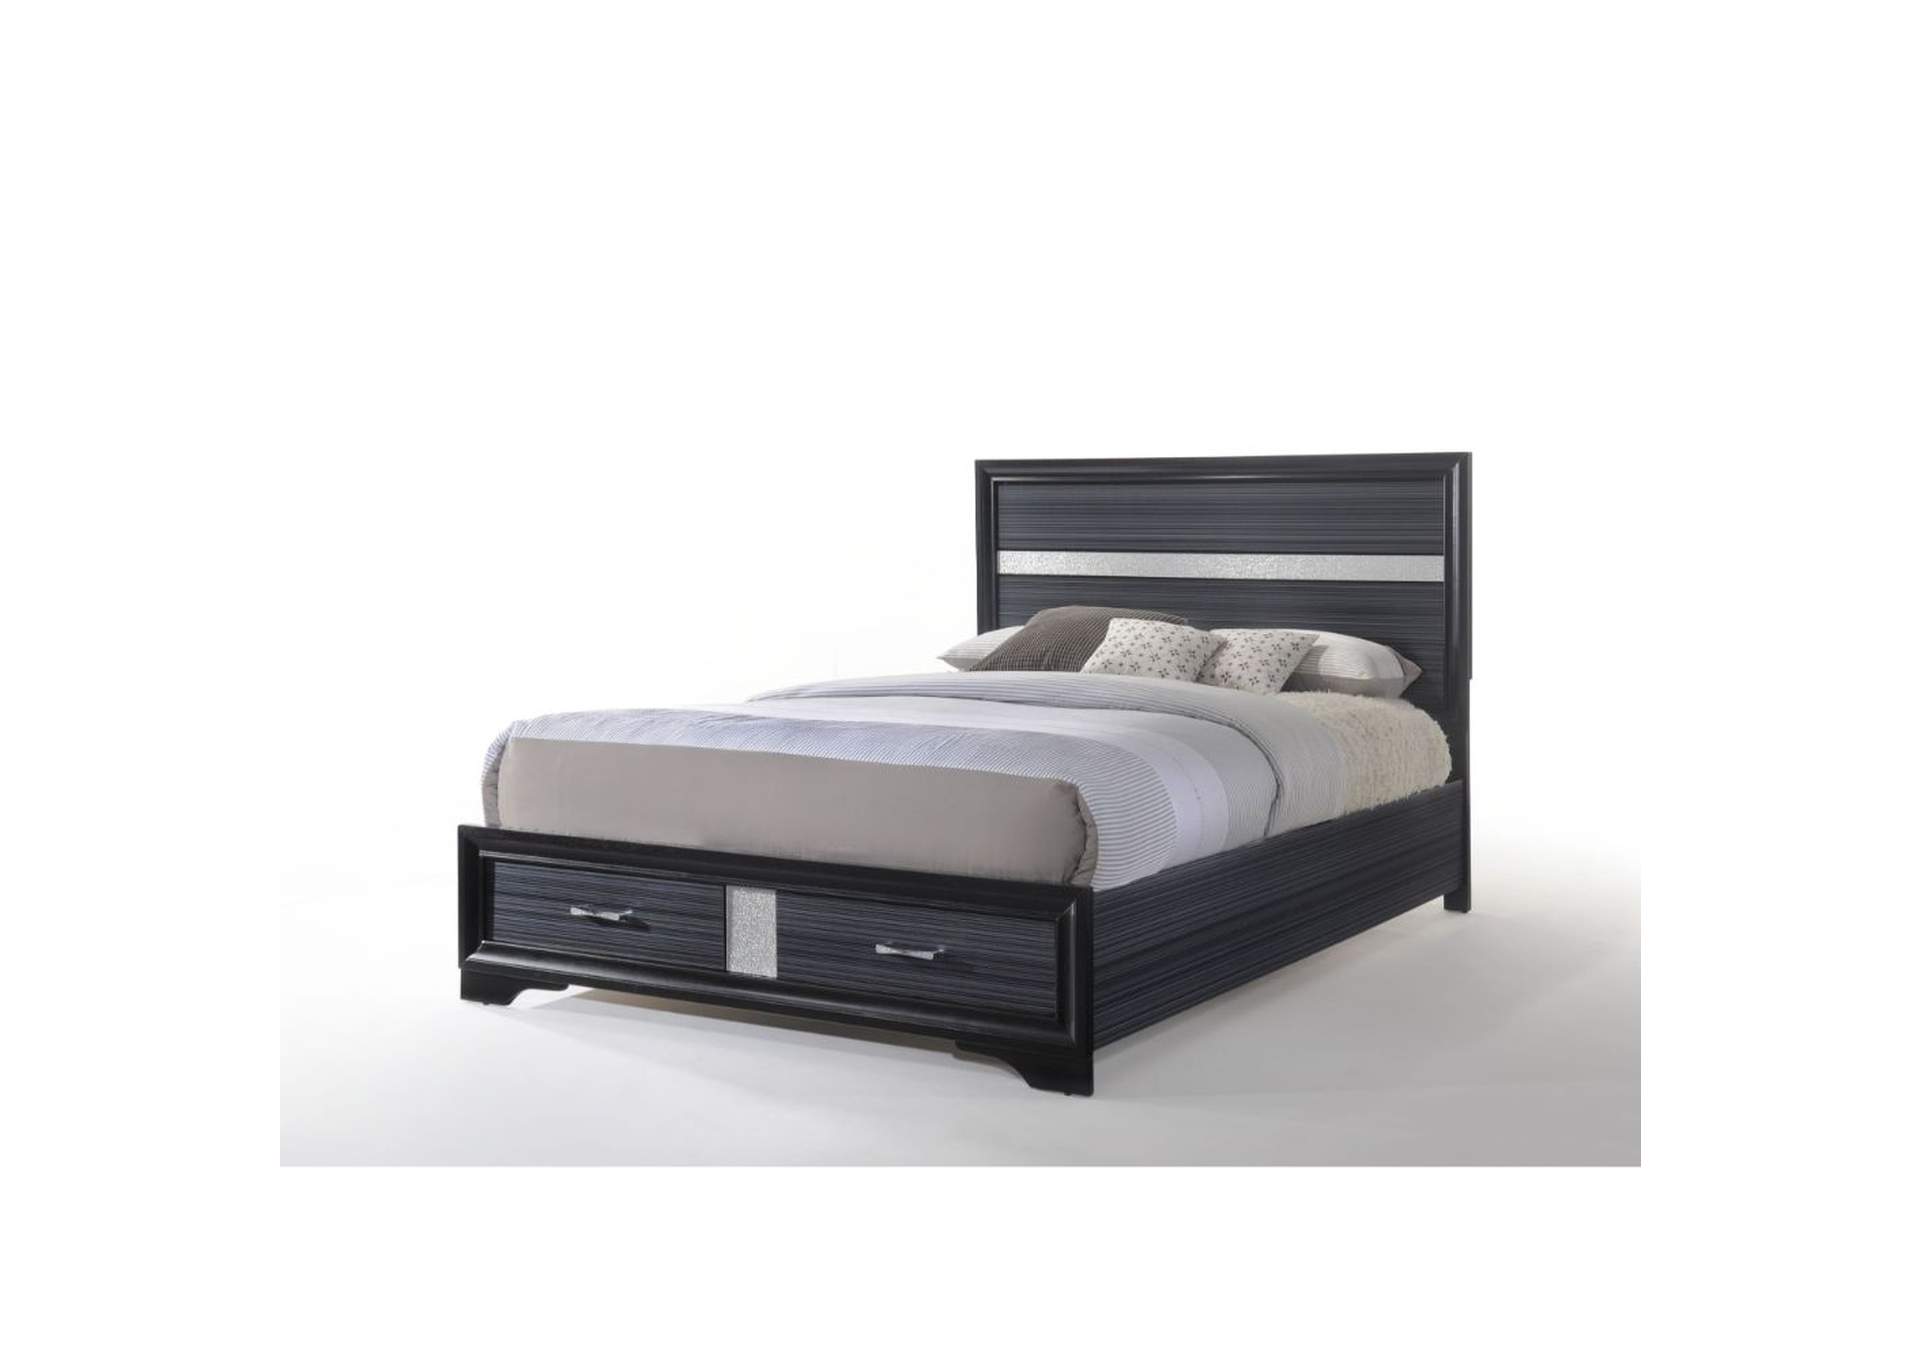 Naima Black Queen Bed,Acme